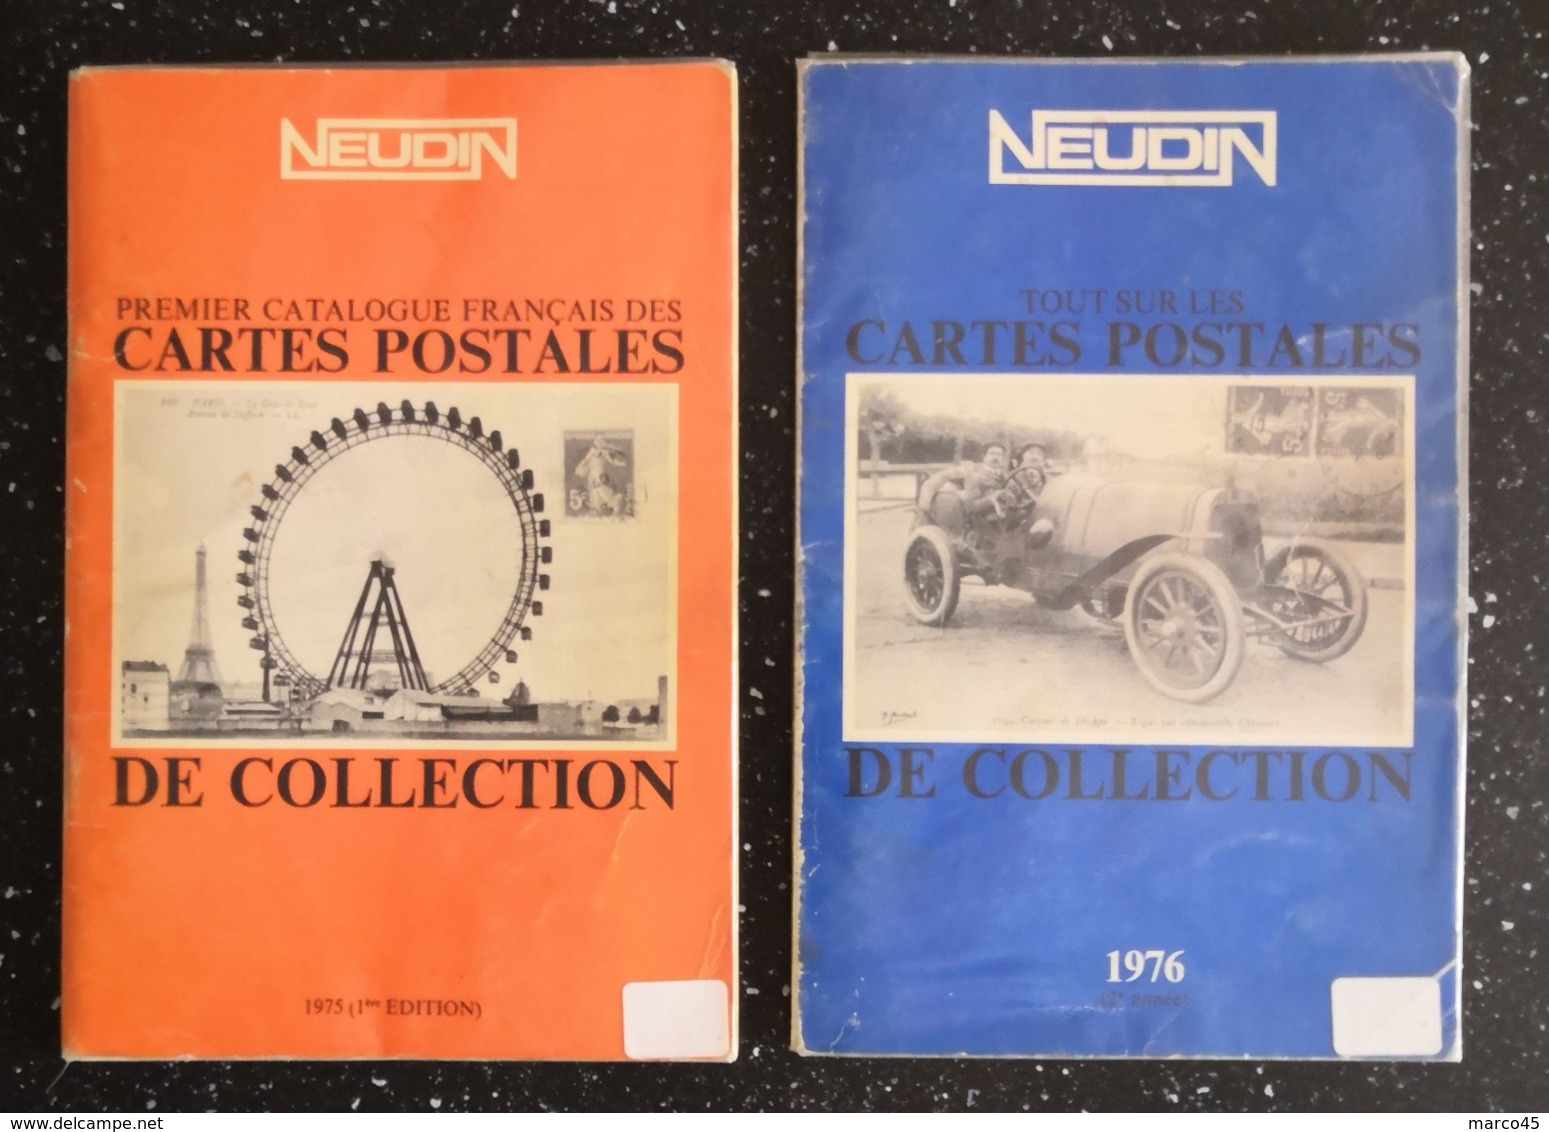 COLLECTION OUVRAGES NEUDIN & FILDIER - AU TOTAL 51 VOLUMES - Livres & Catalogues